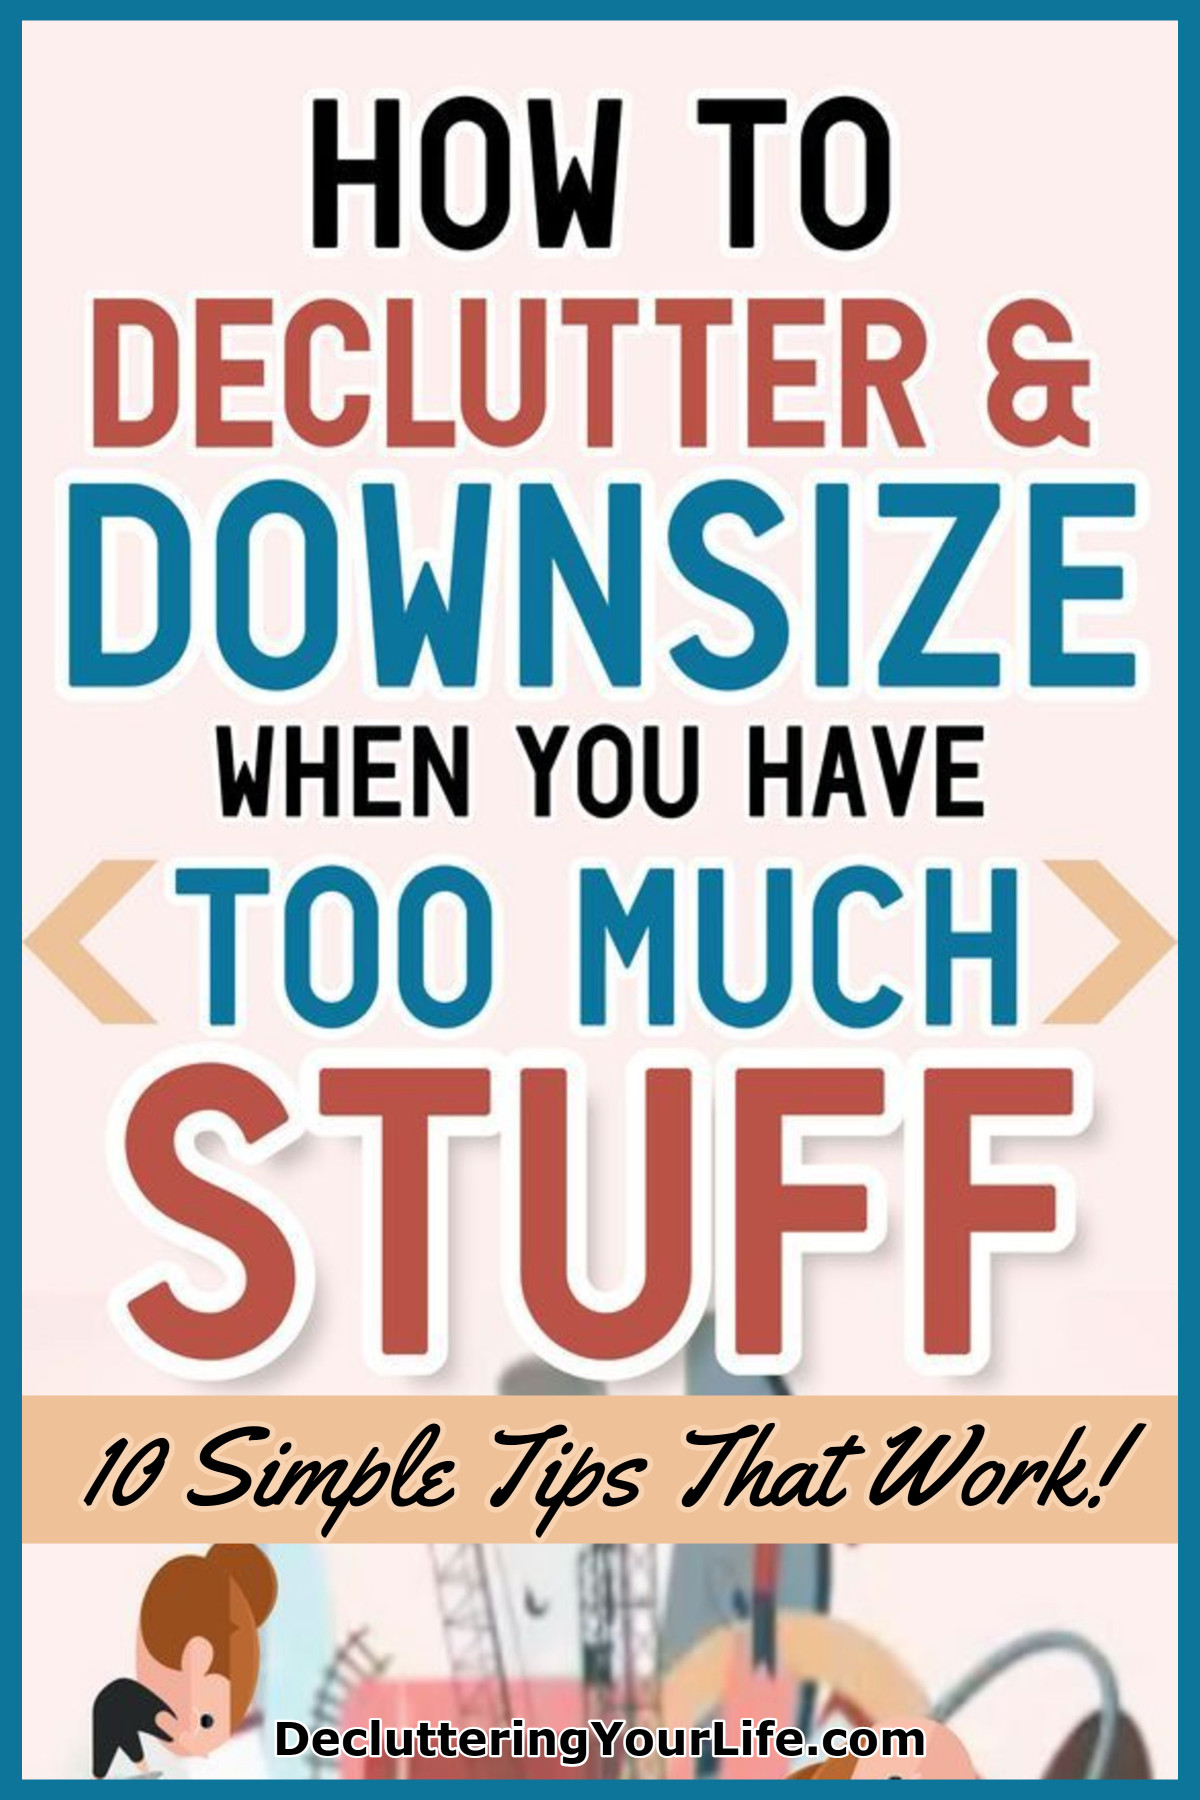 how to declutter and downsize when you have too much stuff - 10 simple tips that work